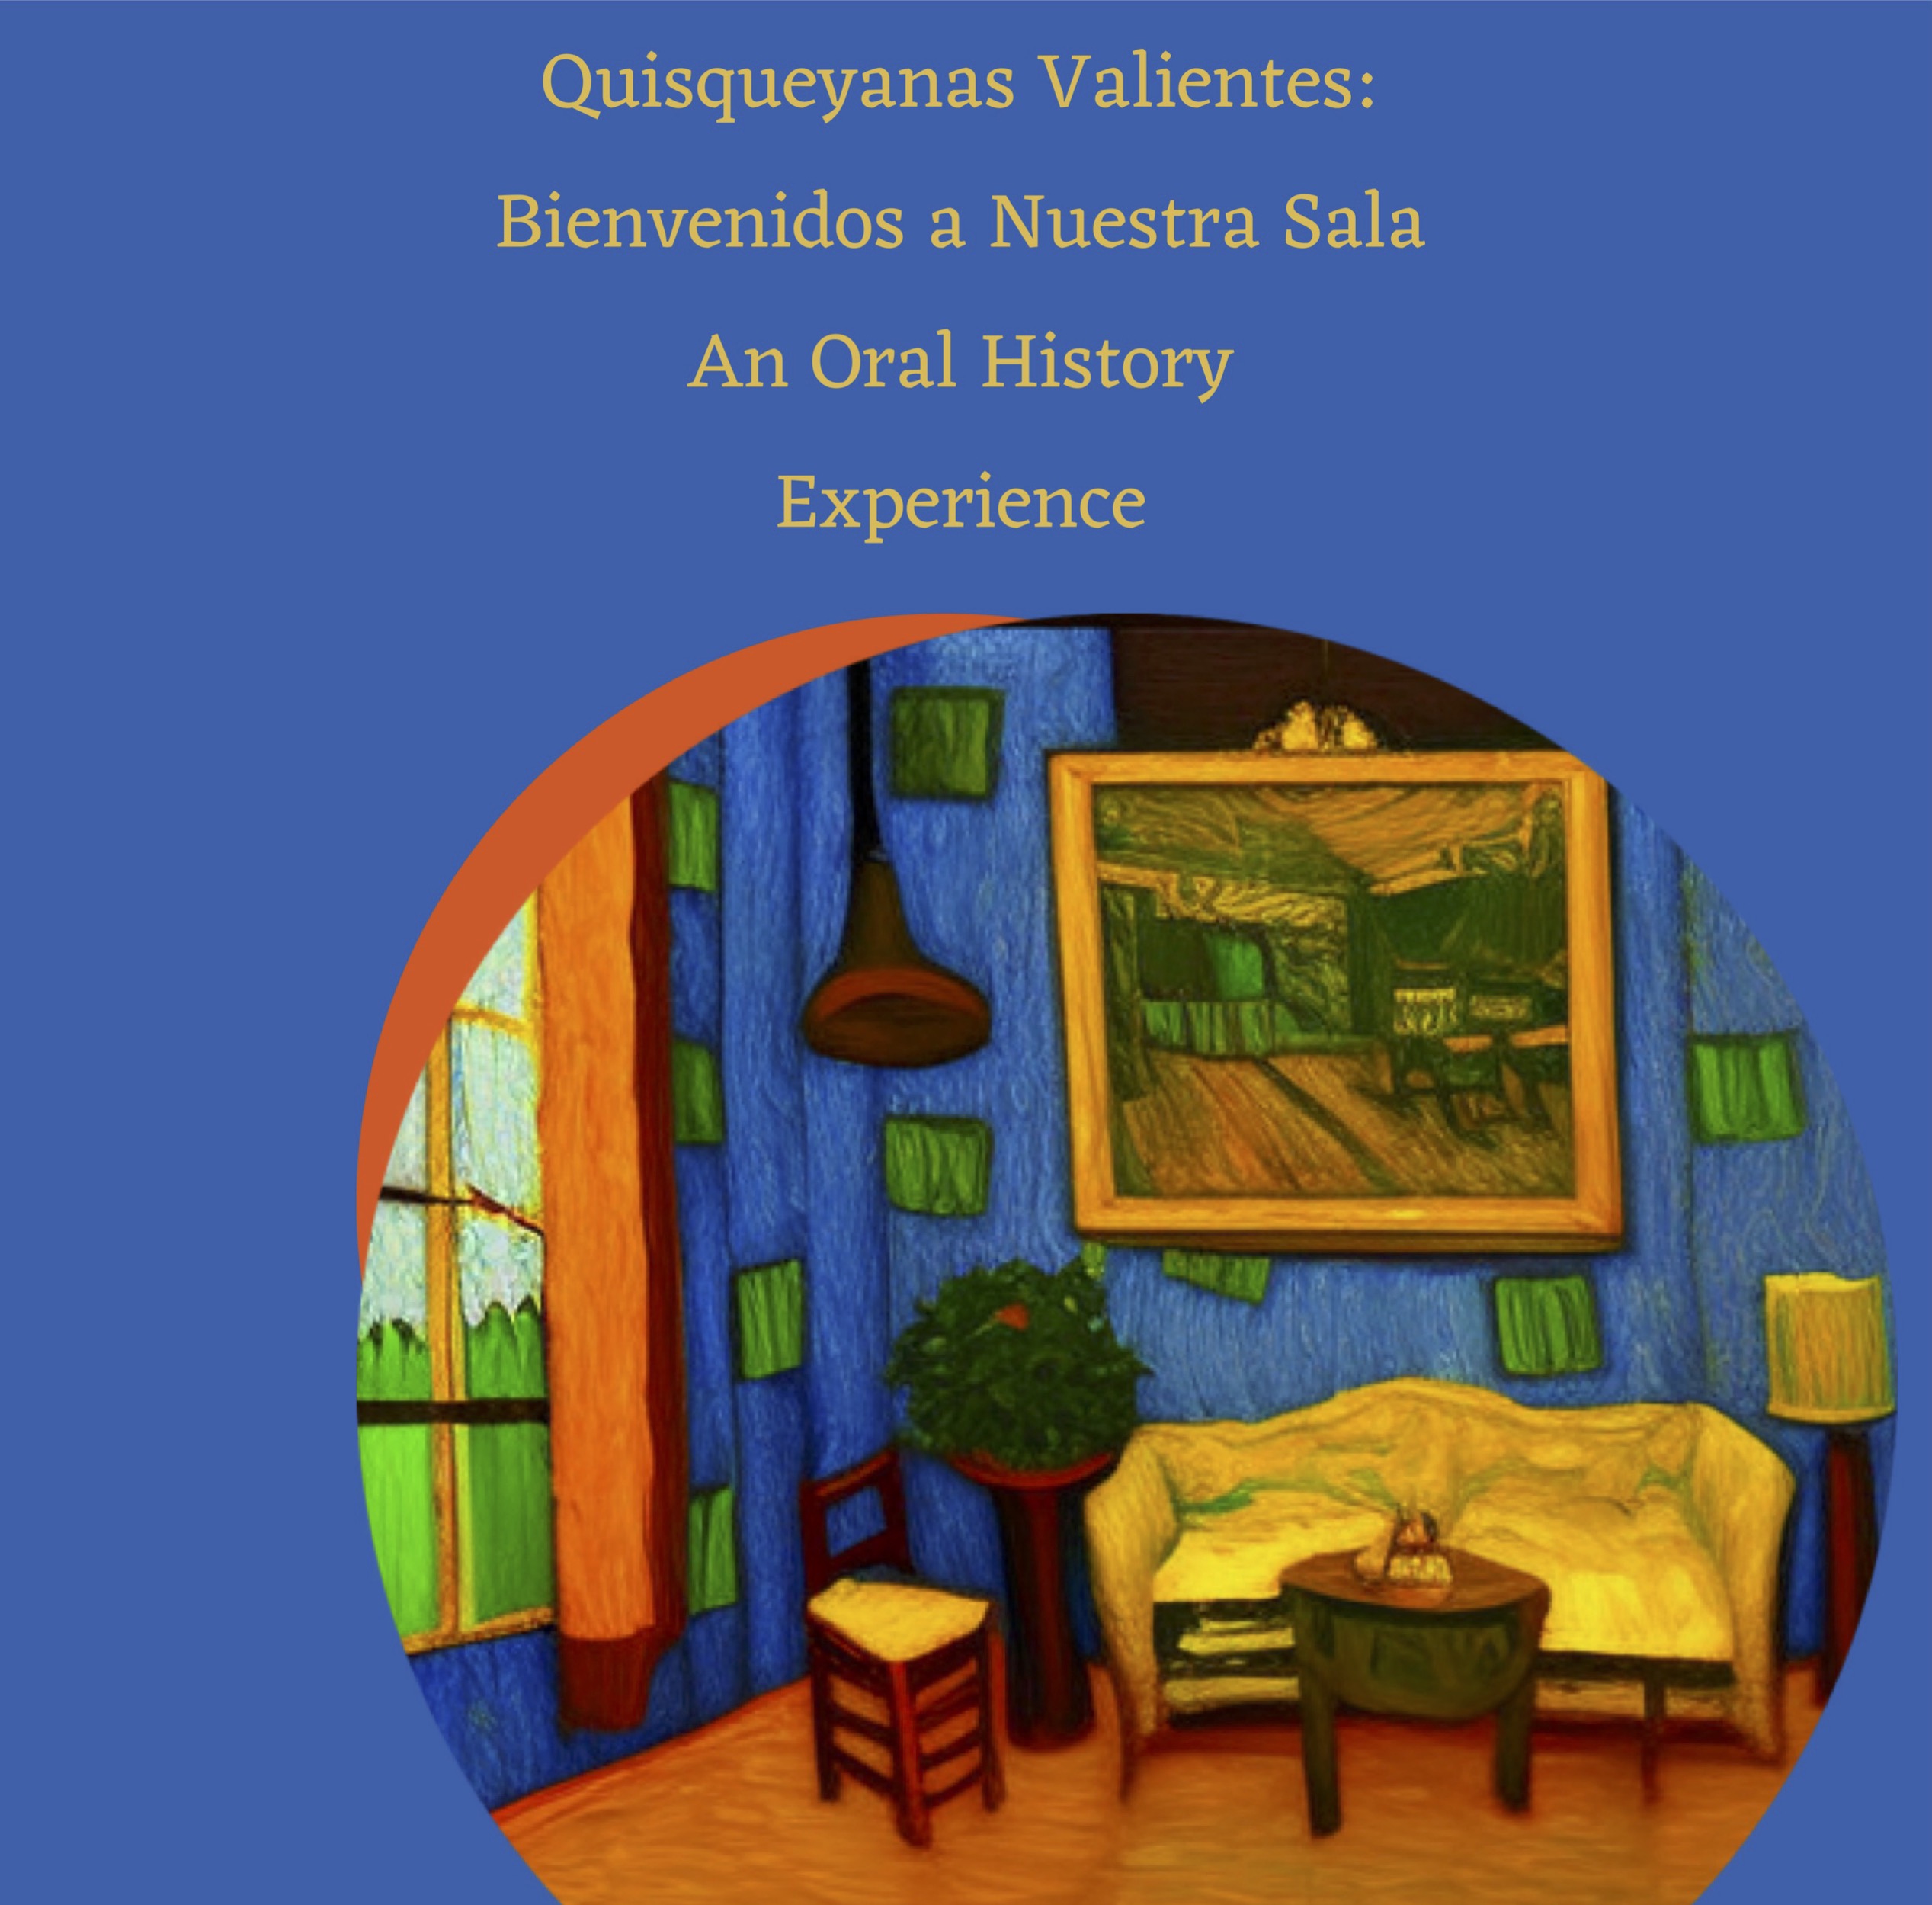 Blue background with yellow letters, title in Spanish Quisqueyanas Valientes: Bienvenidos a Nuestra Sala accompanied by the words An Oral History Experience. The image is an orange circle with a reproduction of a living room, including a yellow couch, a brown and yellow chair, a brown and green coffee table with a figure on top, a brown side table with a plant on top, a painting hanging above the couch depicting a seemingly similar room. The walls of the living room are blue with green squares and there is a window to the left with orange curtains and a visible tree top.